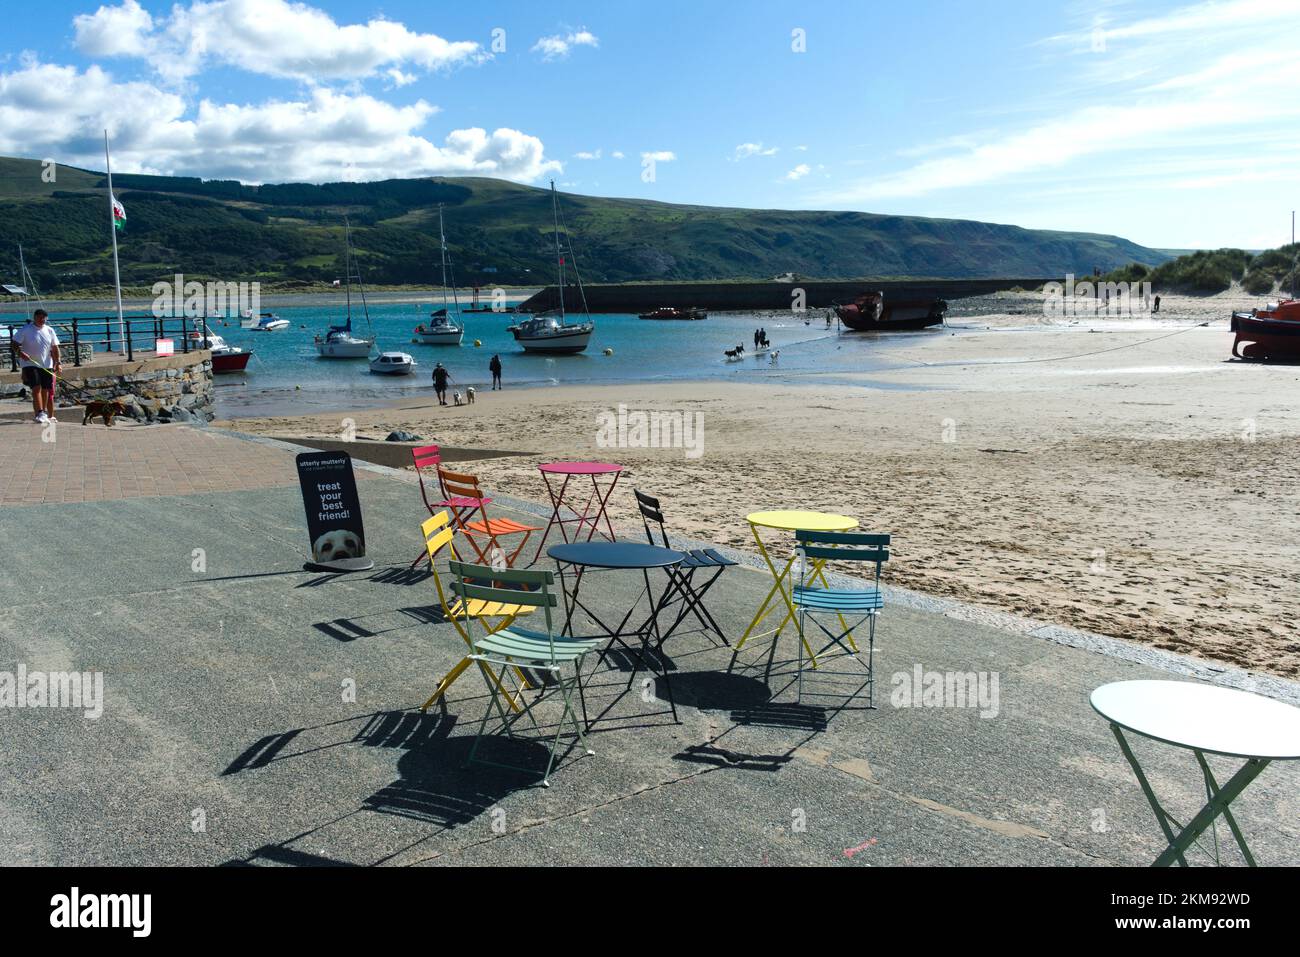 Barmouth beach, Cardigan bay - Wales - September 16 2022: Seascape with colorful cafe tables and chairs in the foreground. British summer seaside scen Stock Photo